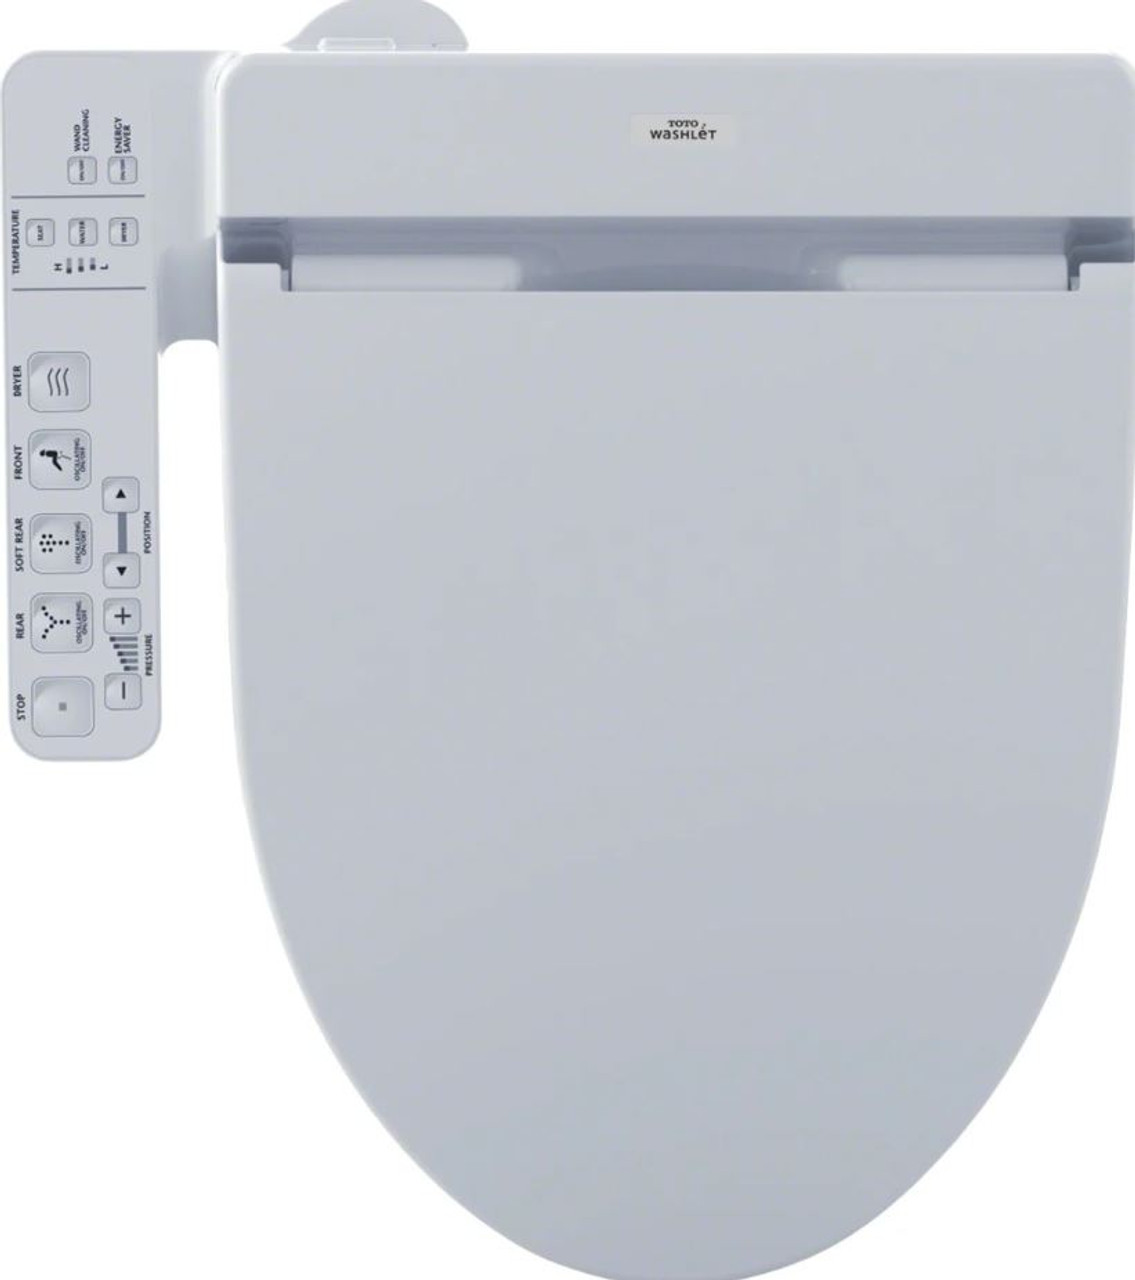 Toto Washlet C100 Elongated Soft Close Bidet Seat With Heated Seat And Warm Air Dryer Royal Bath Place